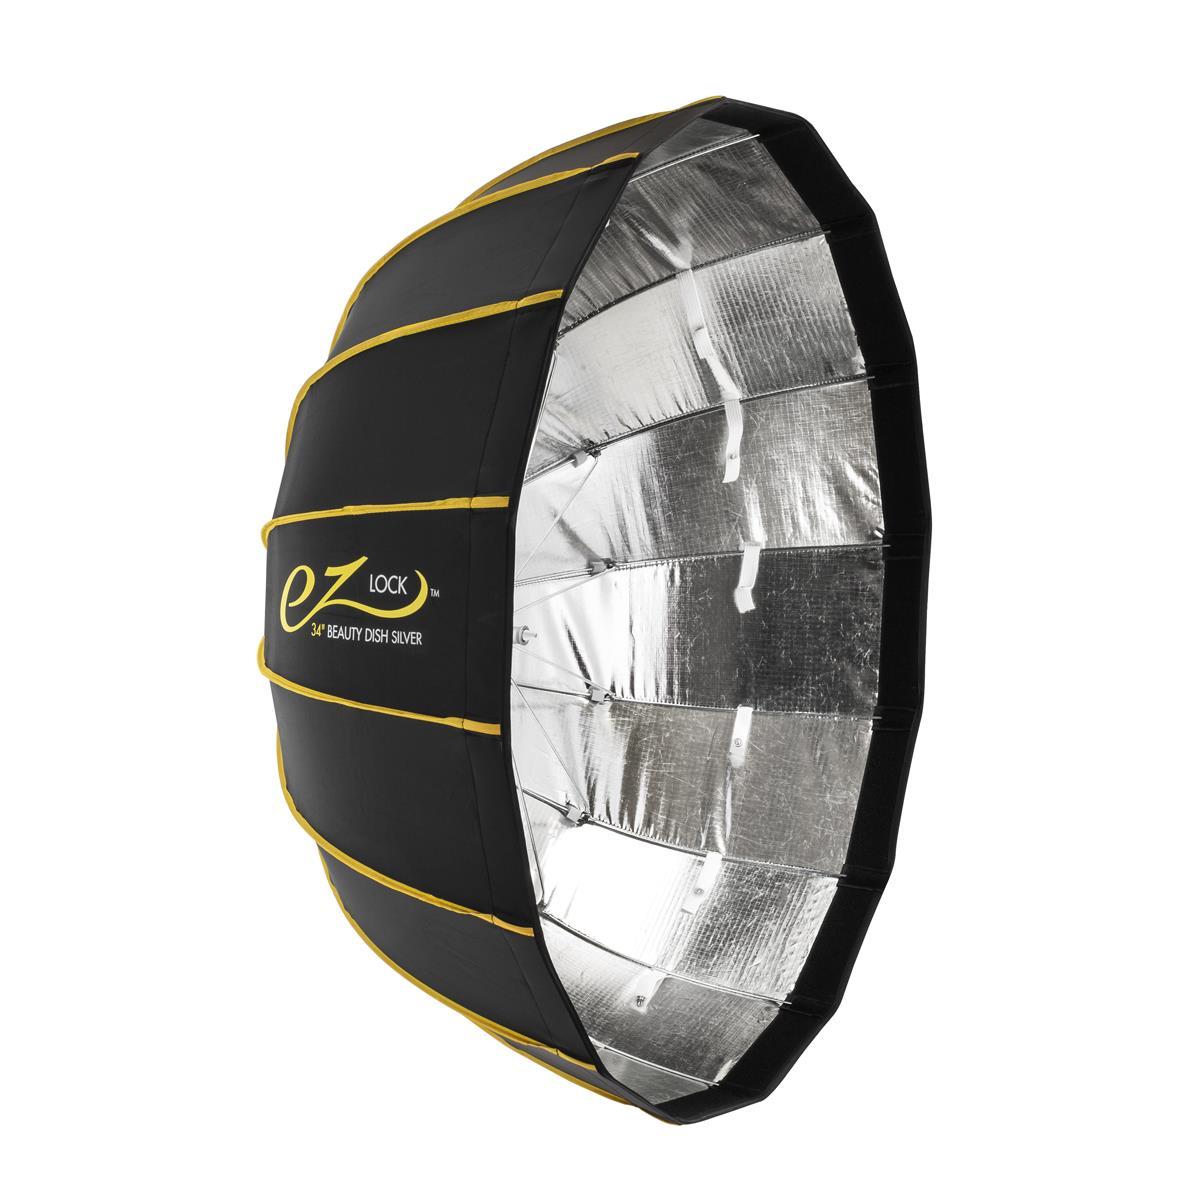 Glow EZ Lock Collapsible Silver or White Beauty Dish (34") $54